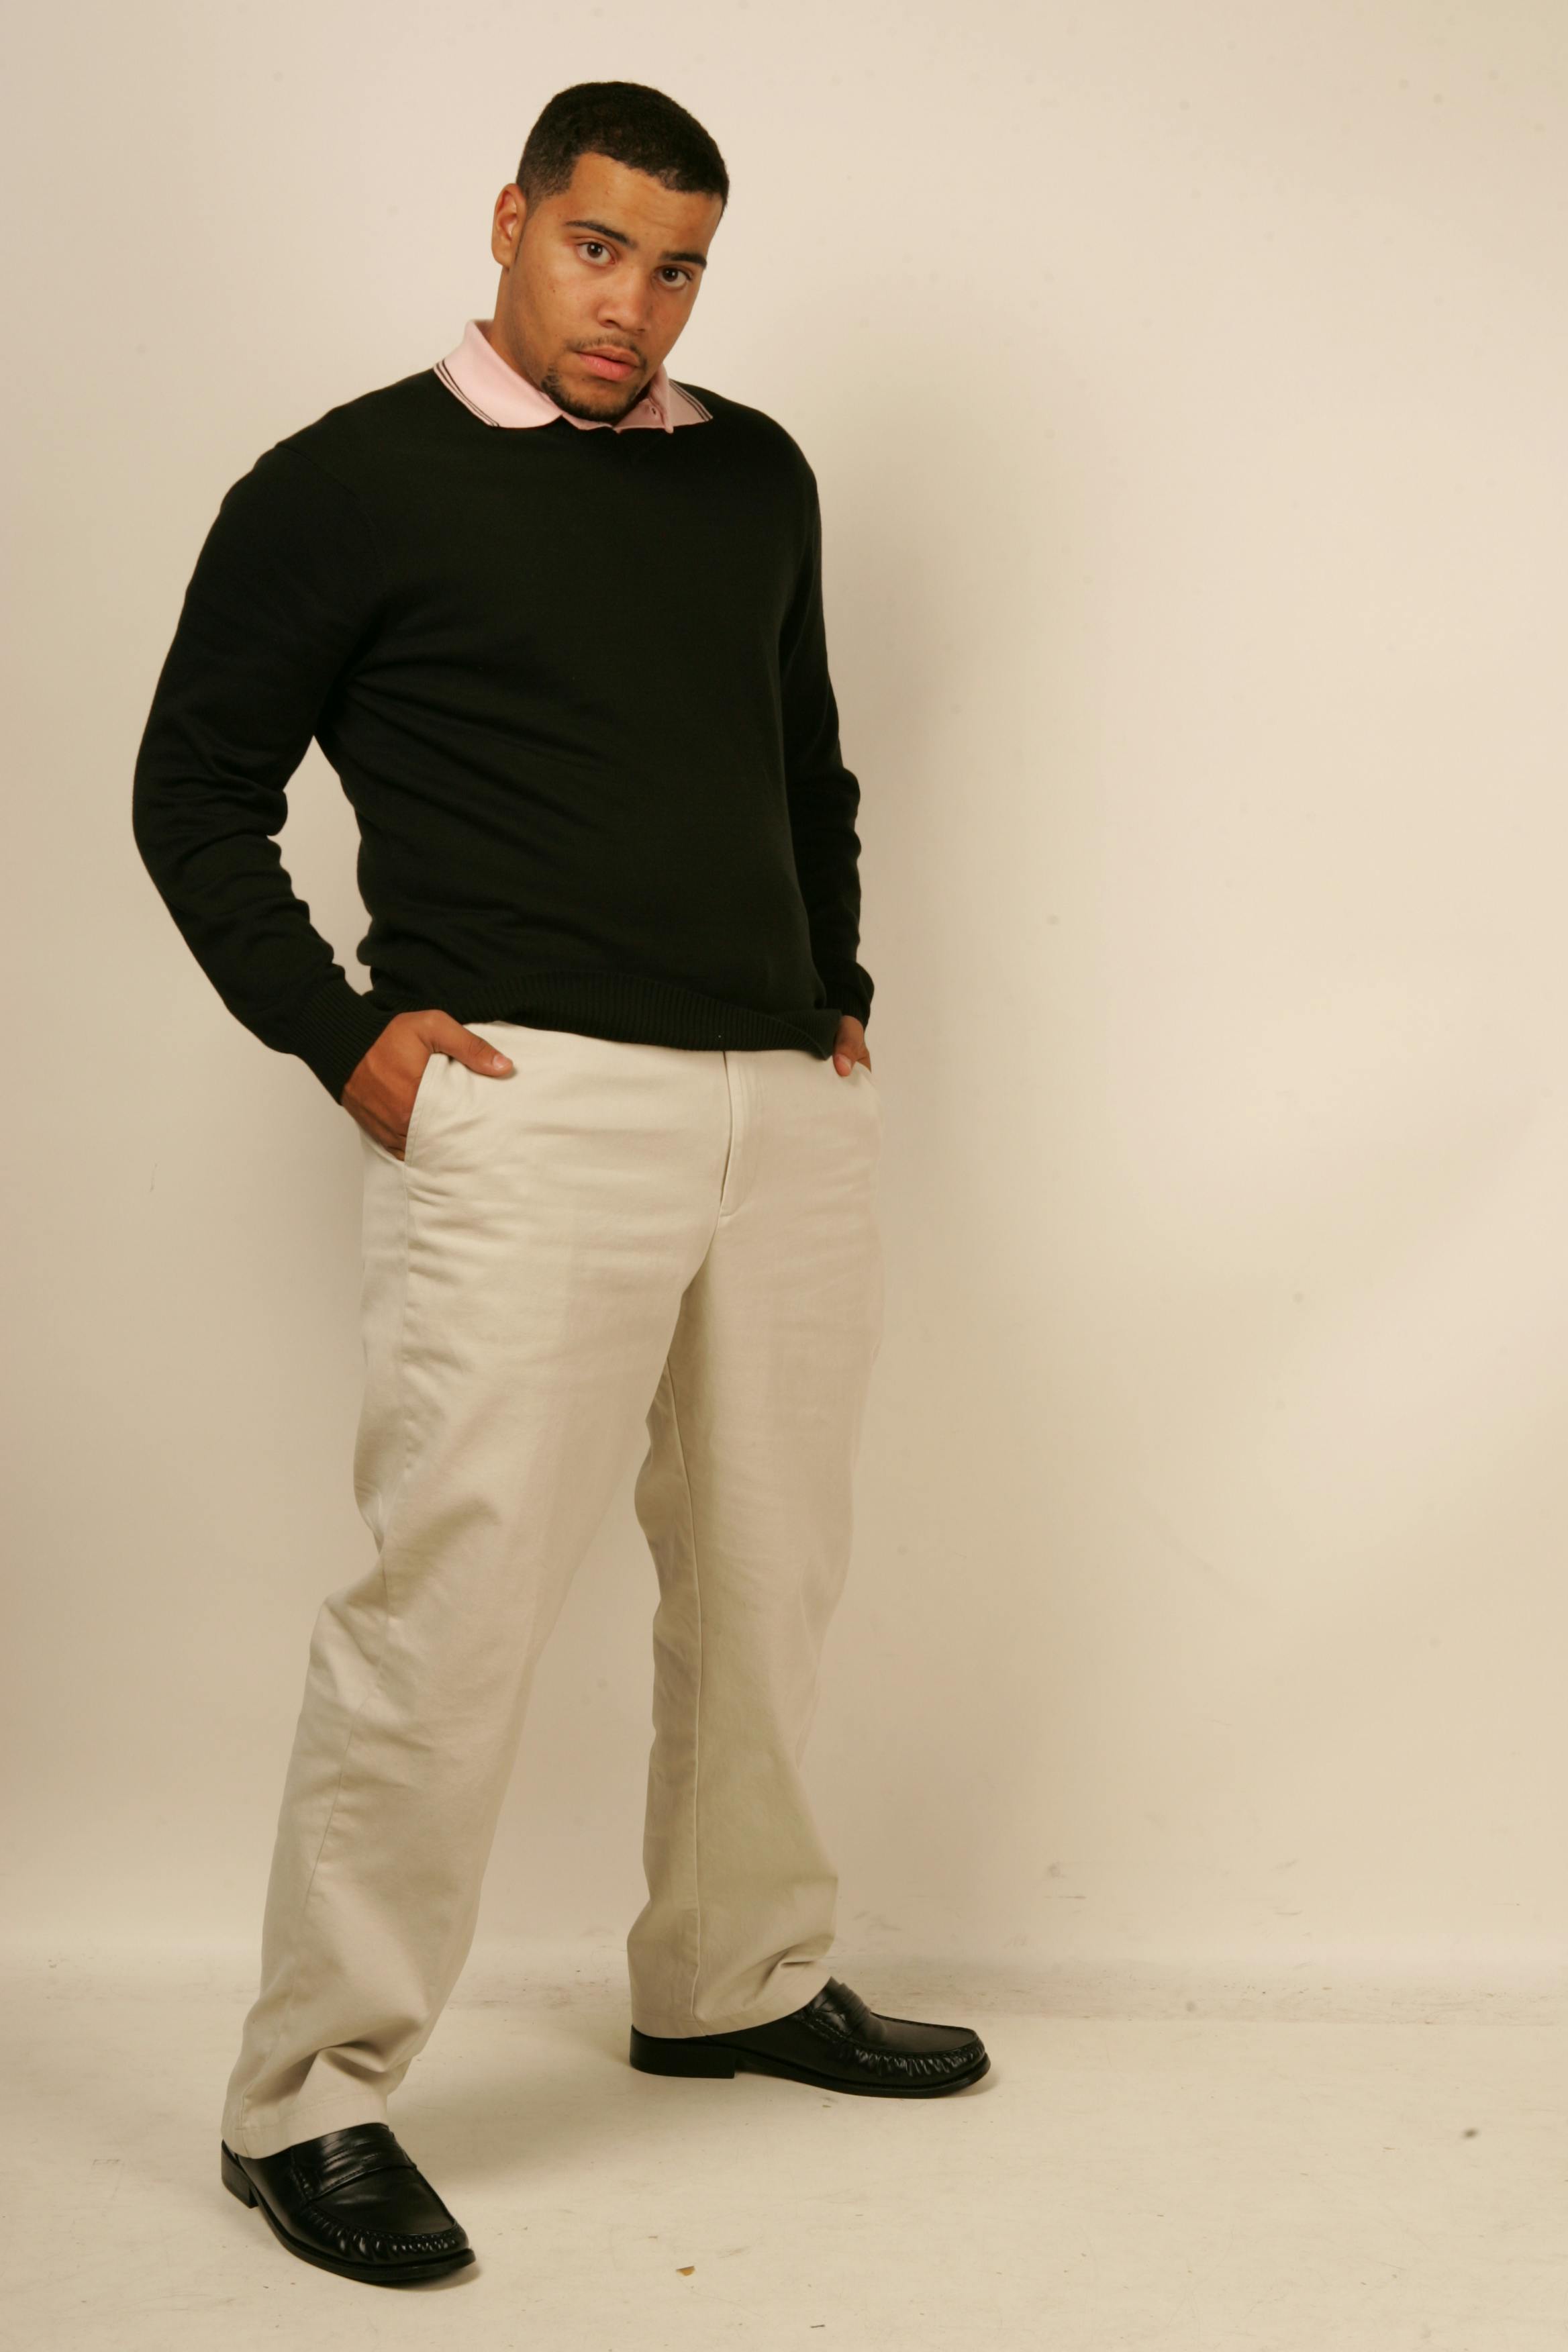 wearing black short-sleeved t-shirt and beige pants